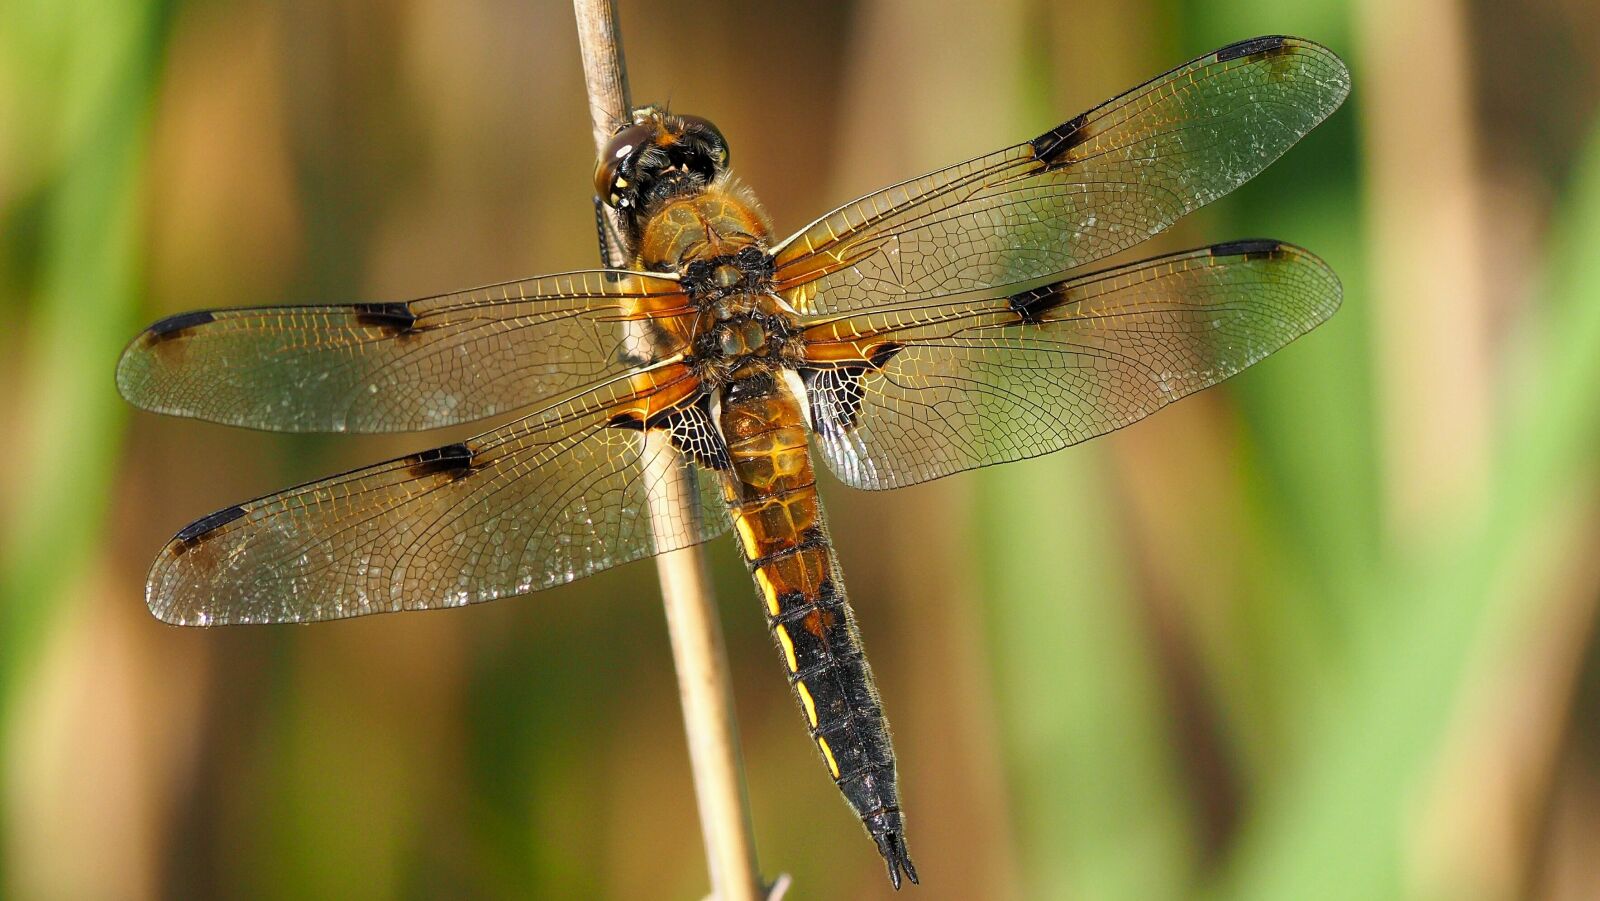 Panasonic Lumix G Vario 100-300mm F4-5.6 OIS sample photo. Nature, insects, dragonfly photography